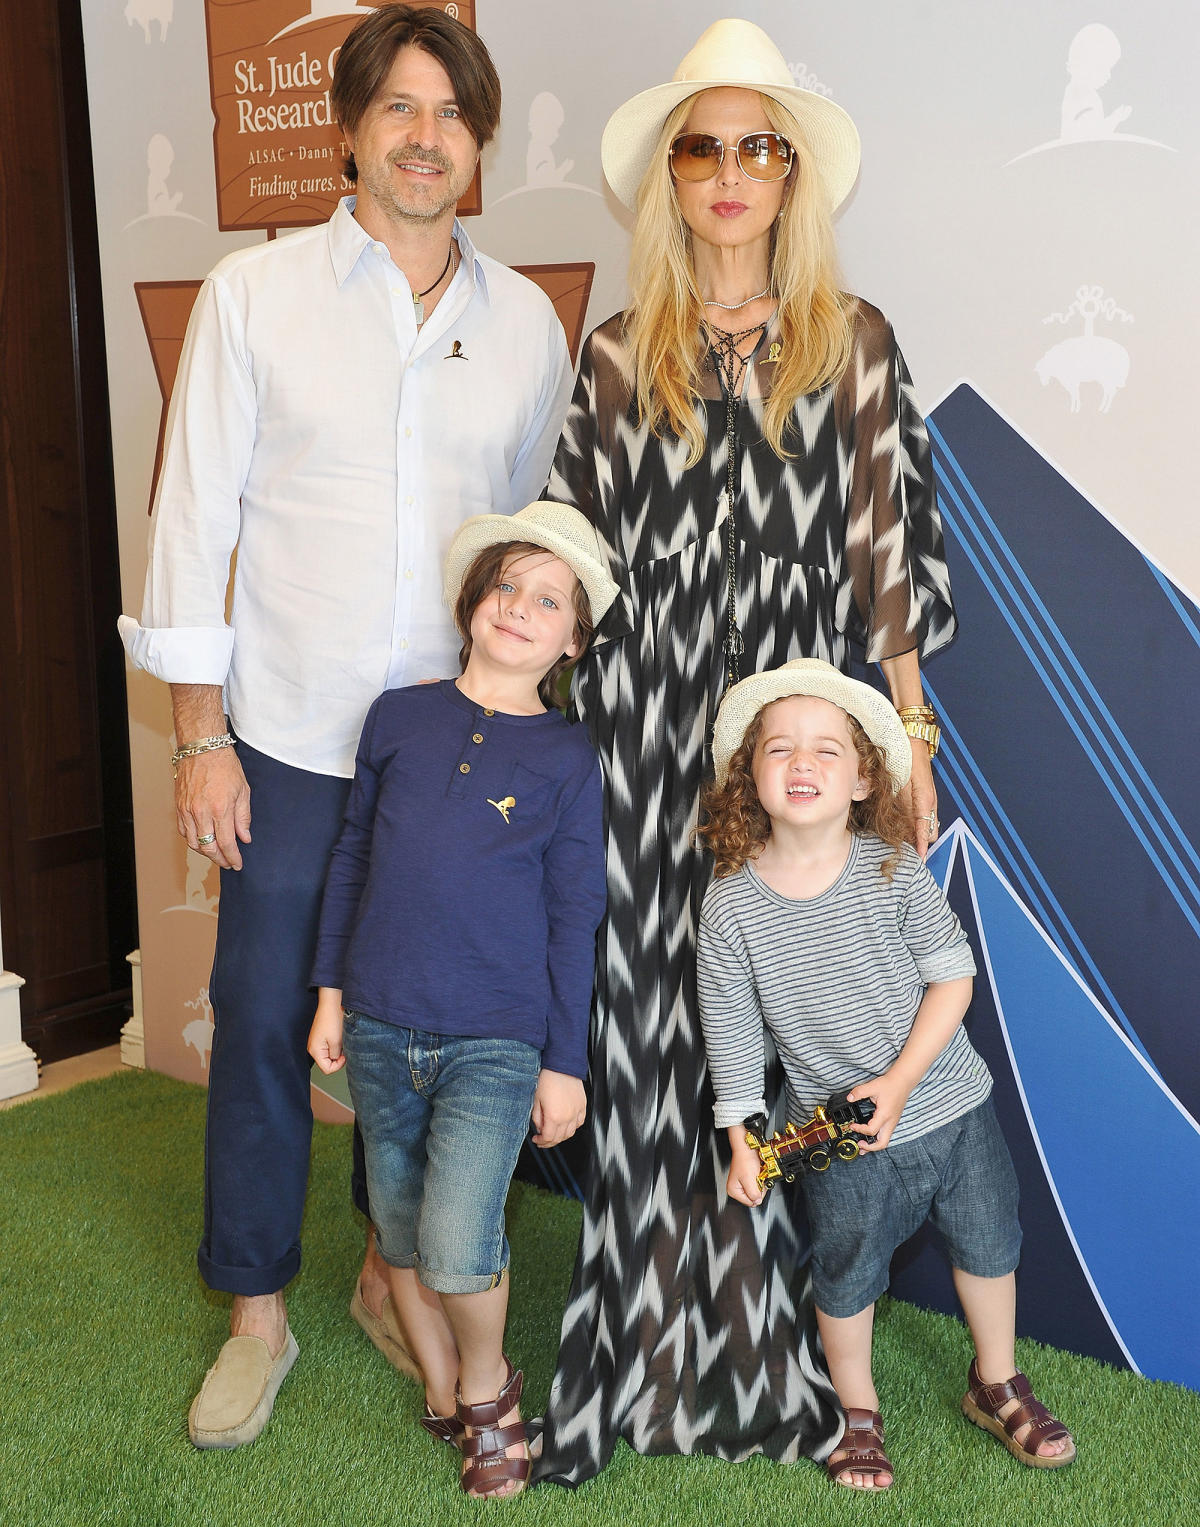 Rachel Zoe Reveals Her Best Shopping Advice and Styling Tips